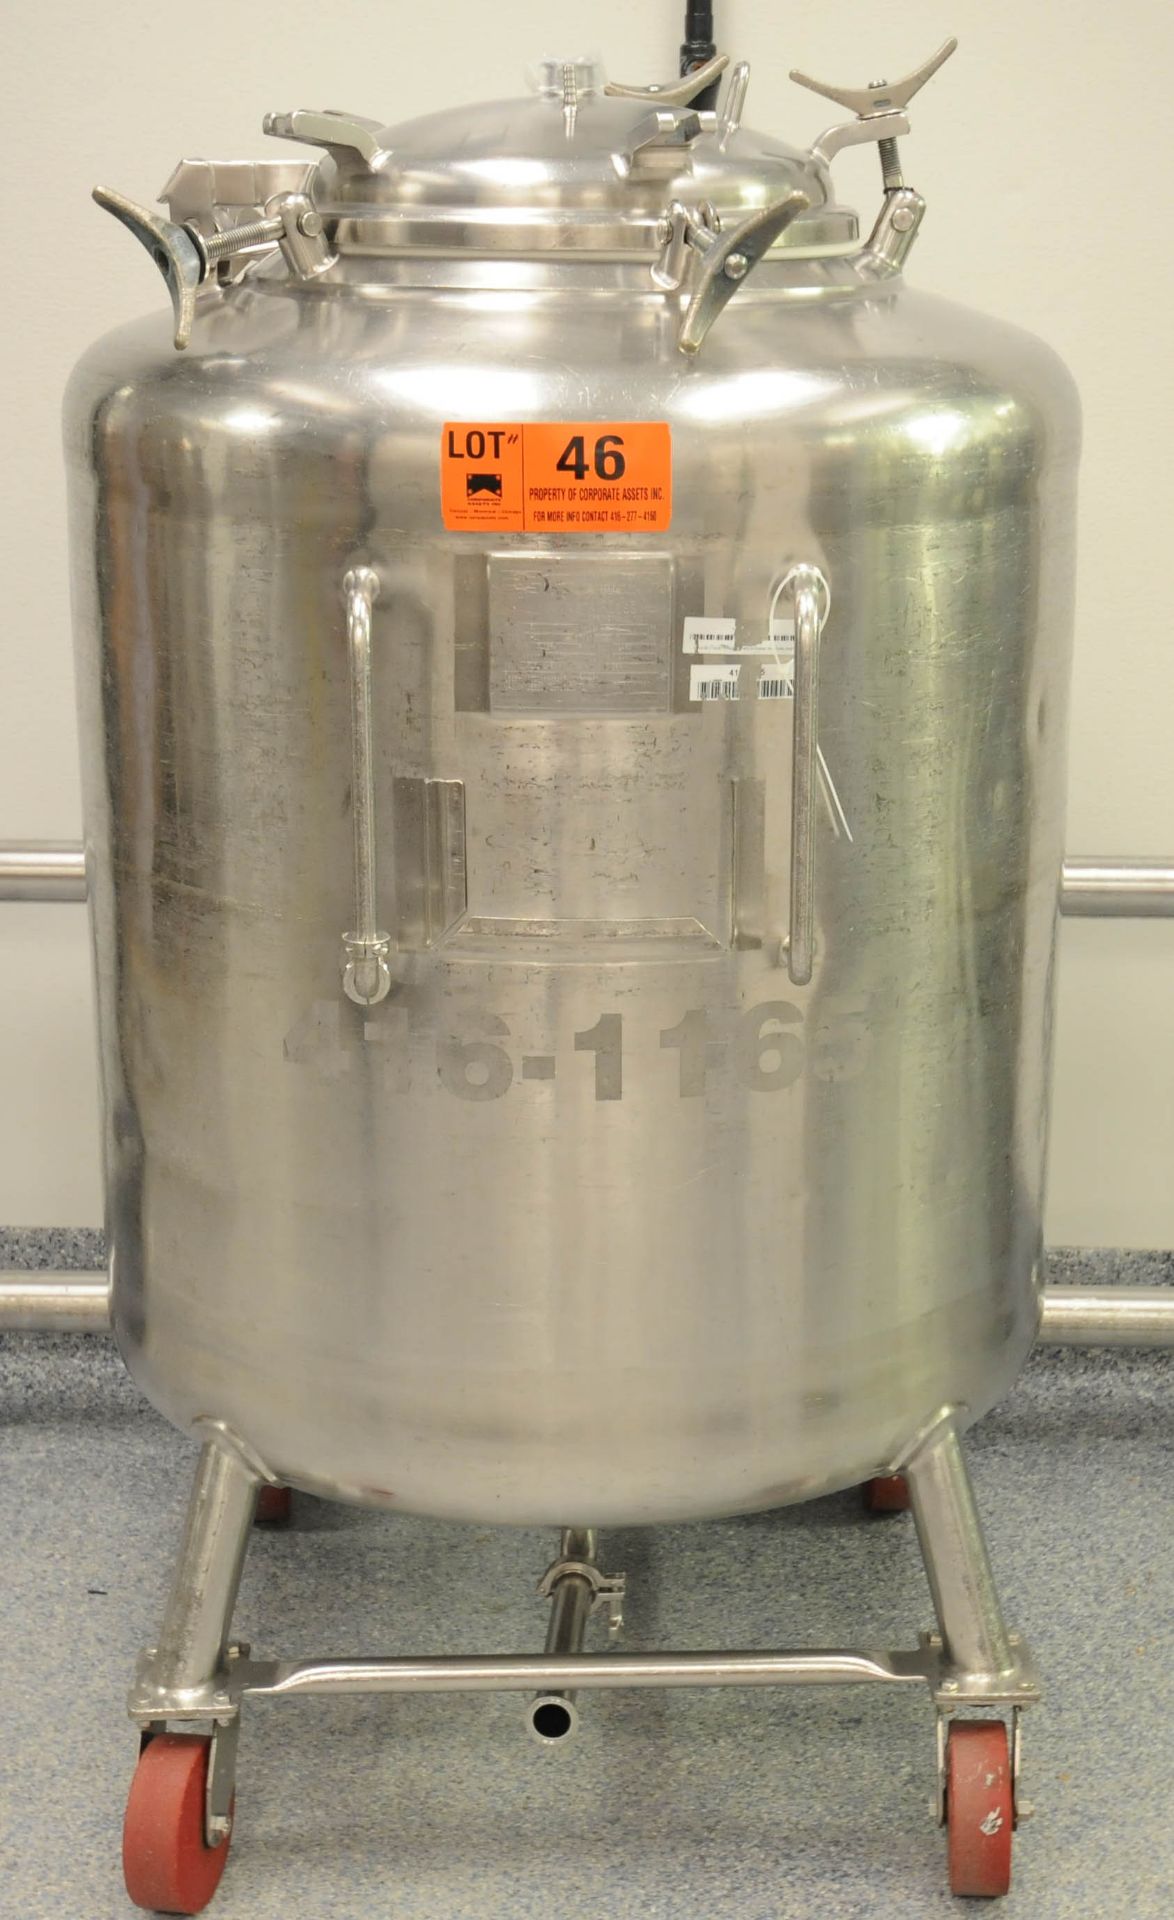 PRECISION STAINLESS 104742 PORTABLE SINGLE WALL STAINLESS STEEL TANK WITH 480 LITER CAPACITY,